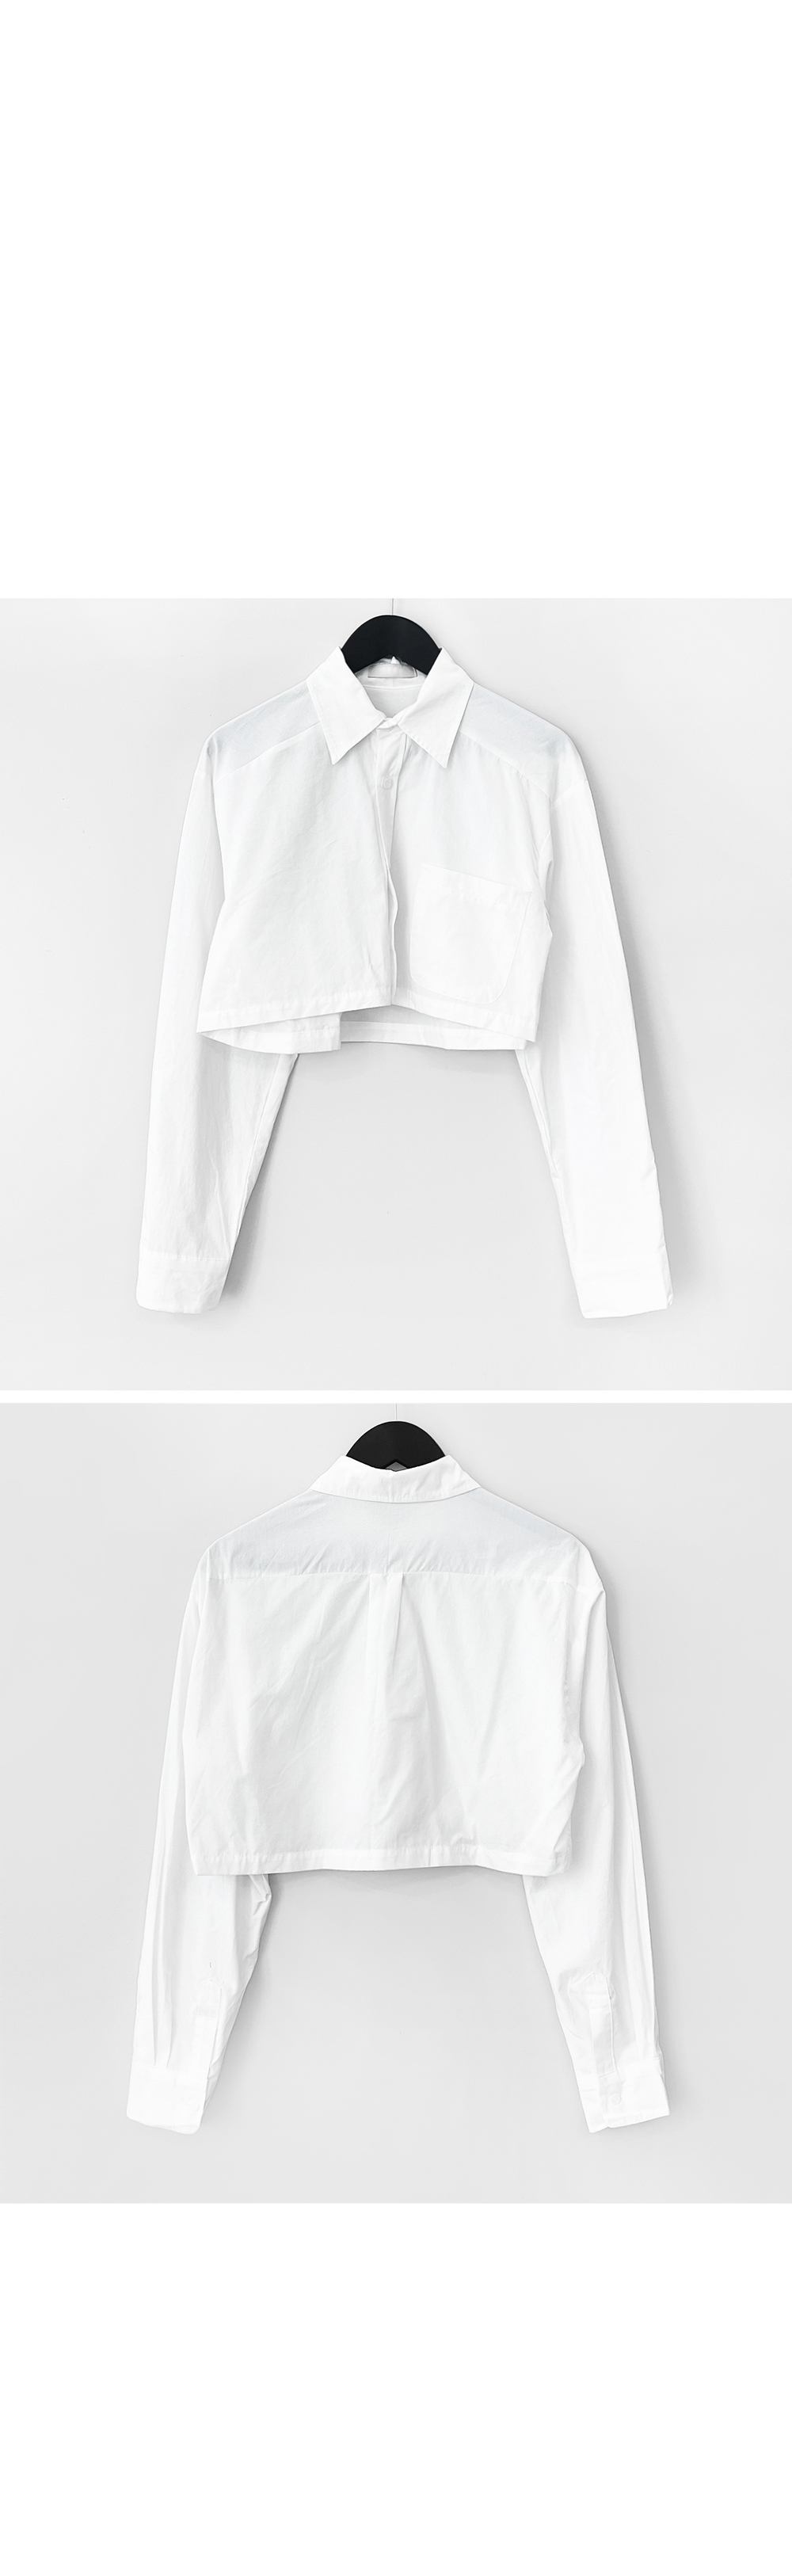 long sleeved tee white color image-S1L9